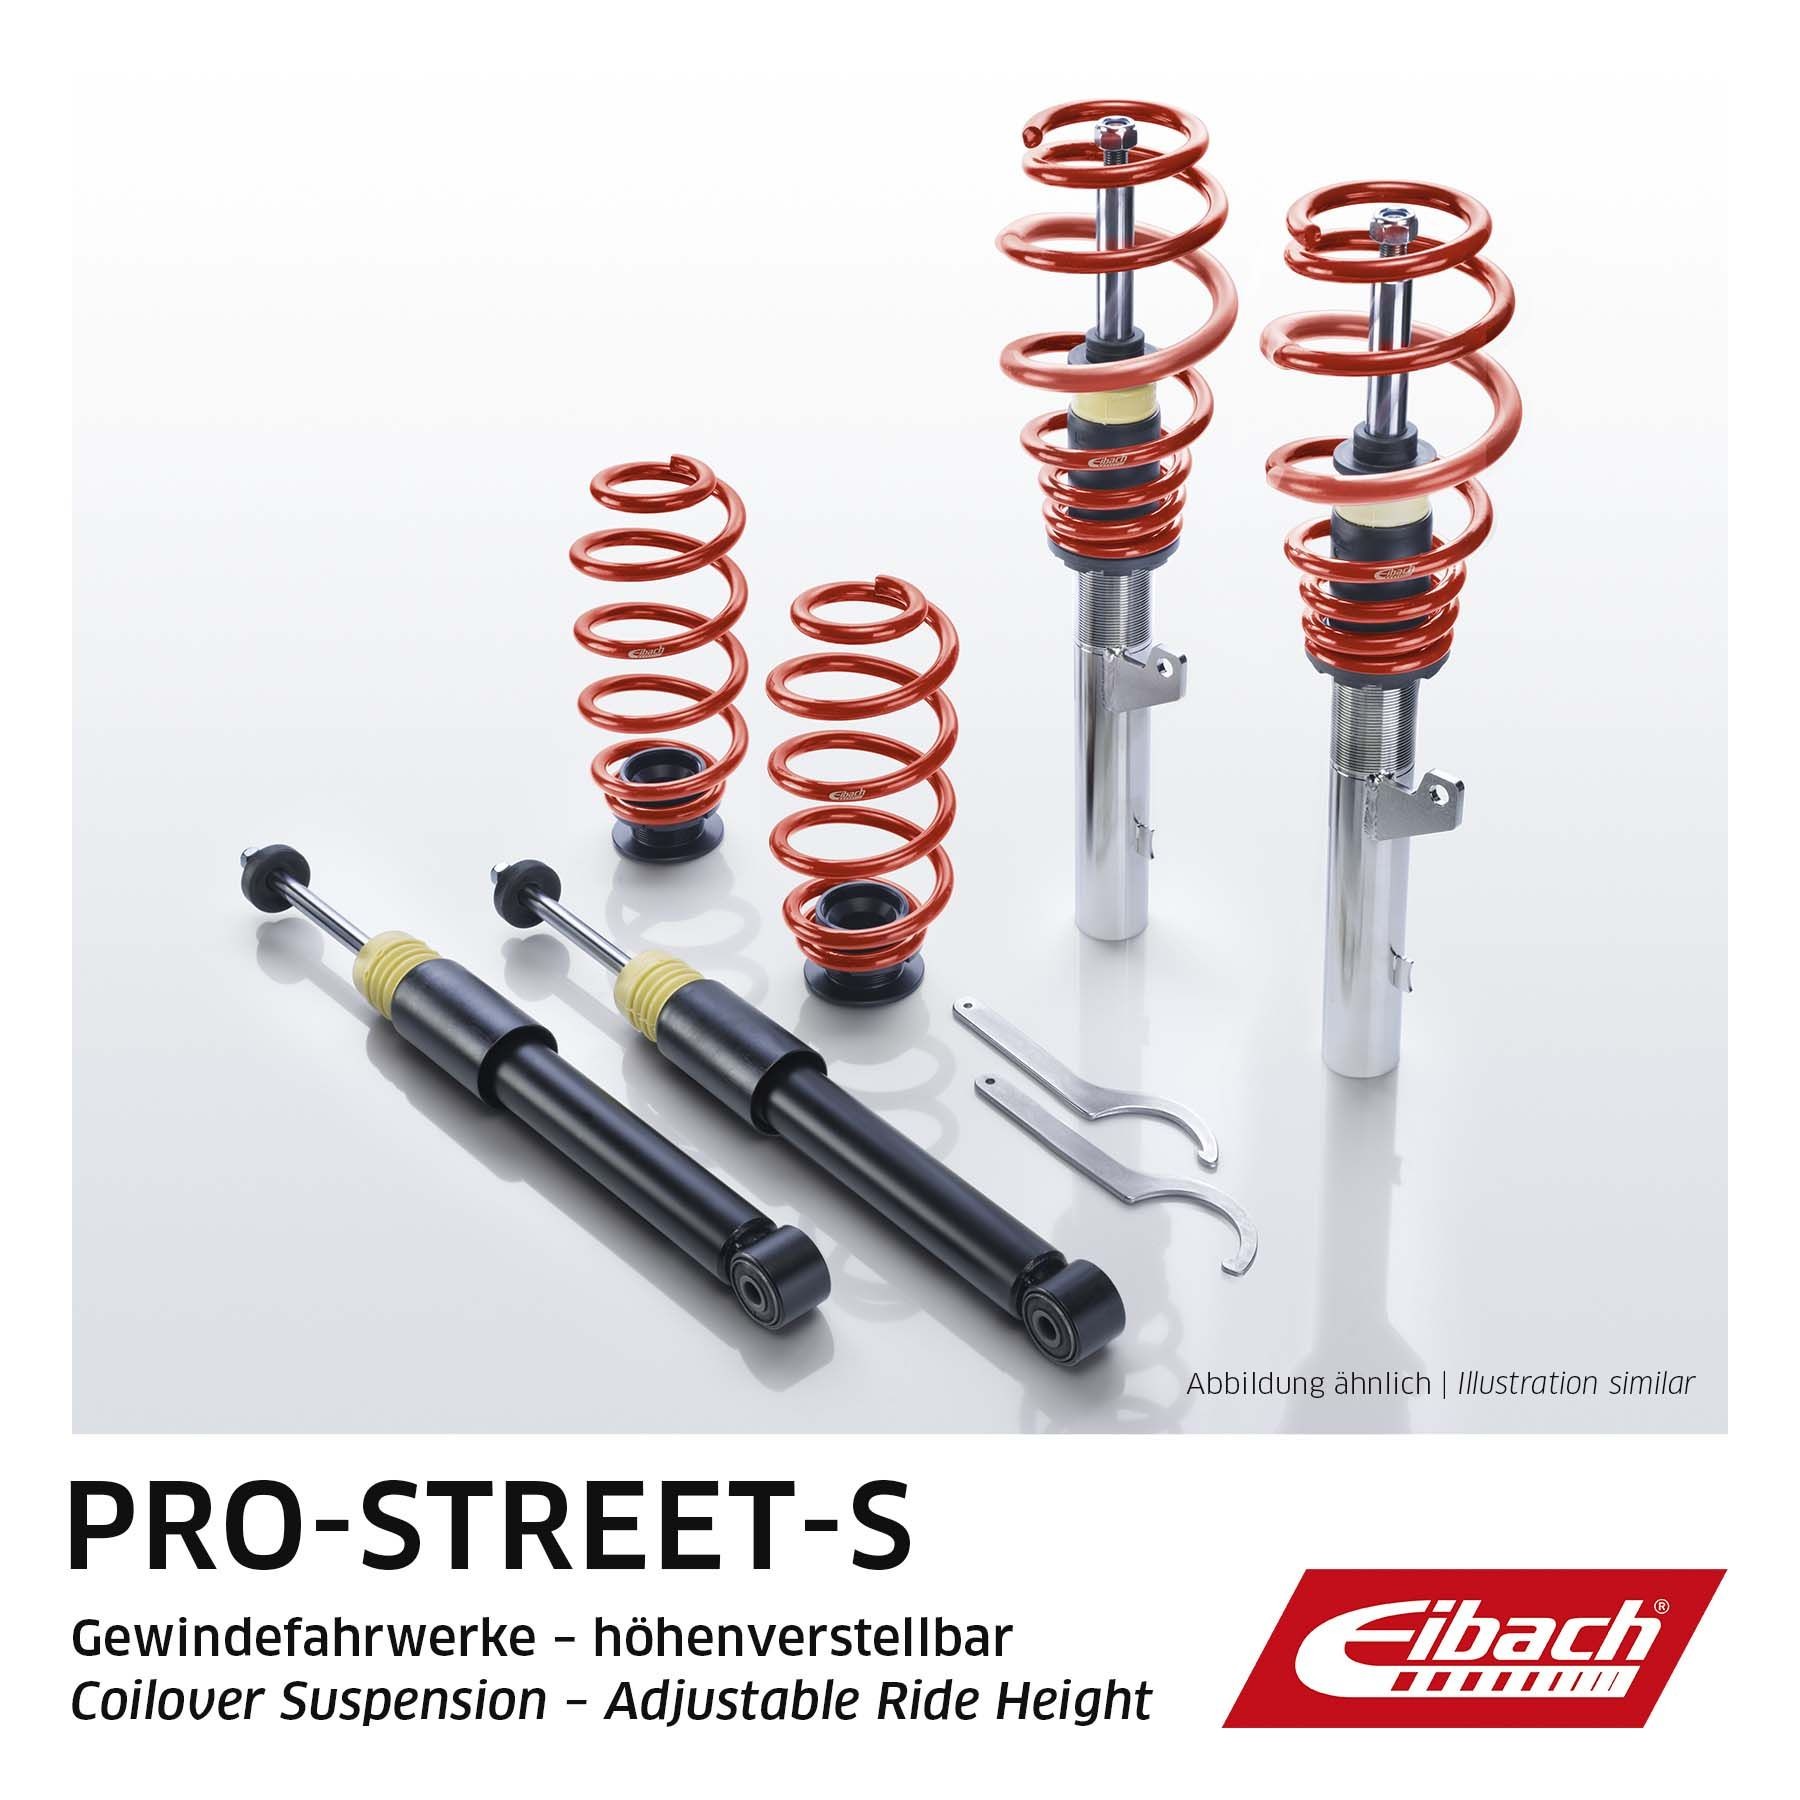 Peugeot 206 Suspension Kit, coil springs / shock absorbers EIBACH PSS65-70-002-01-22 cheap